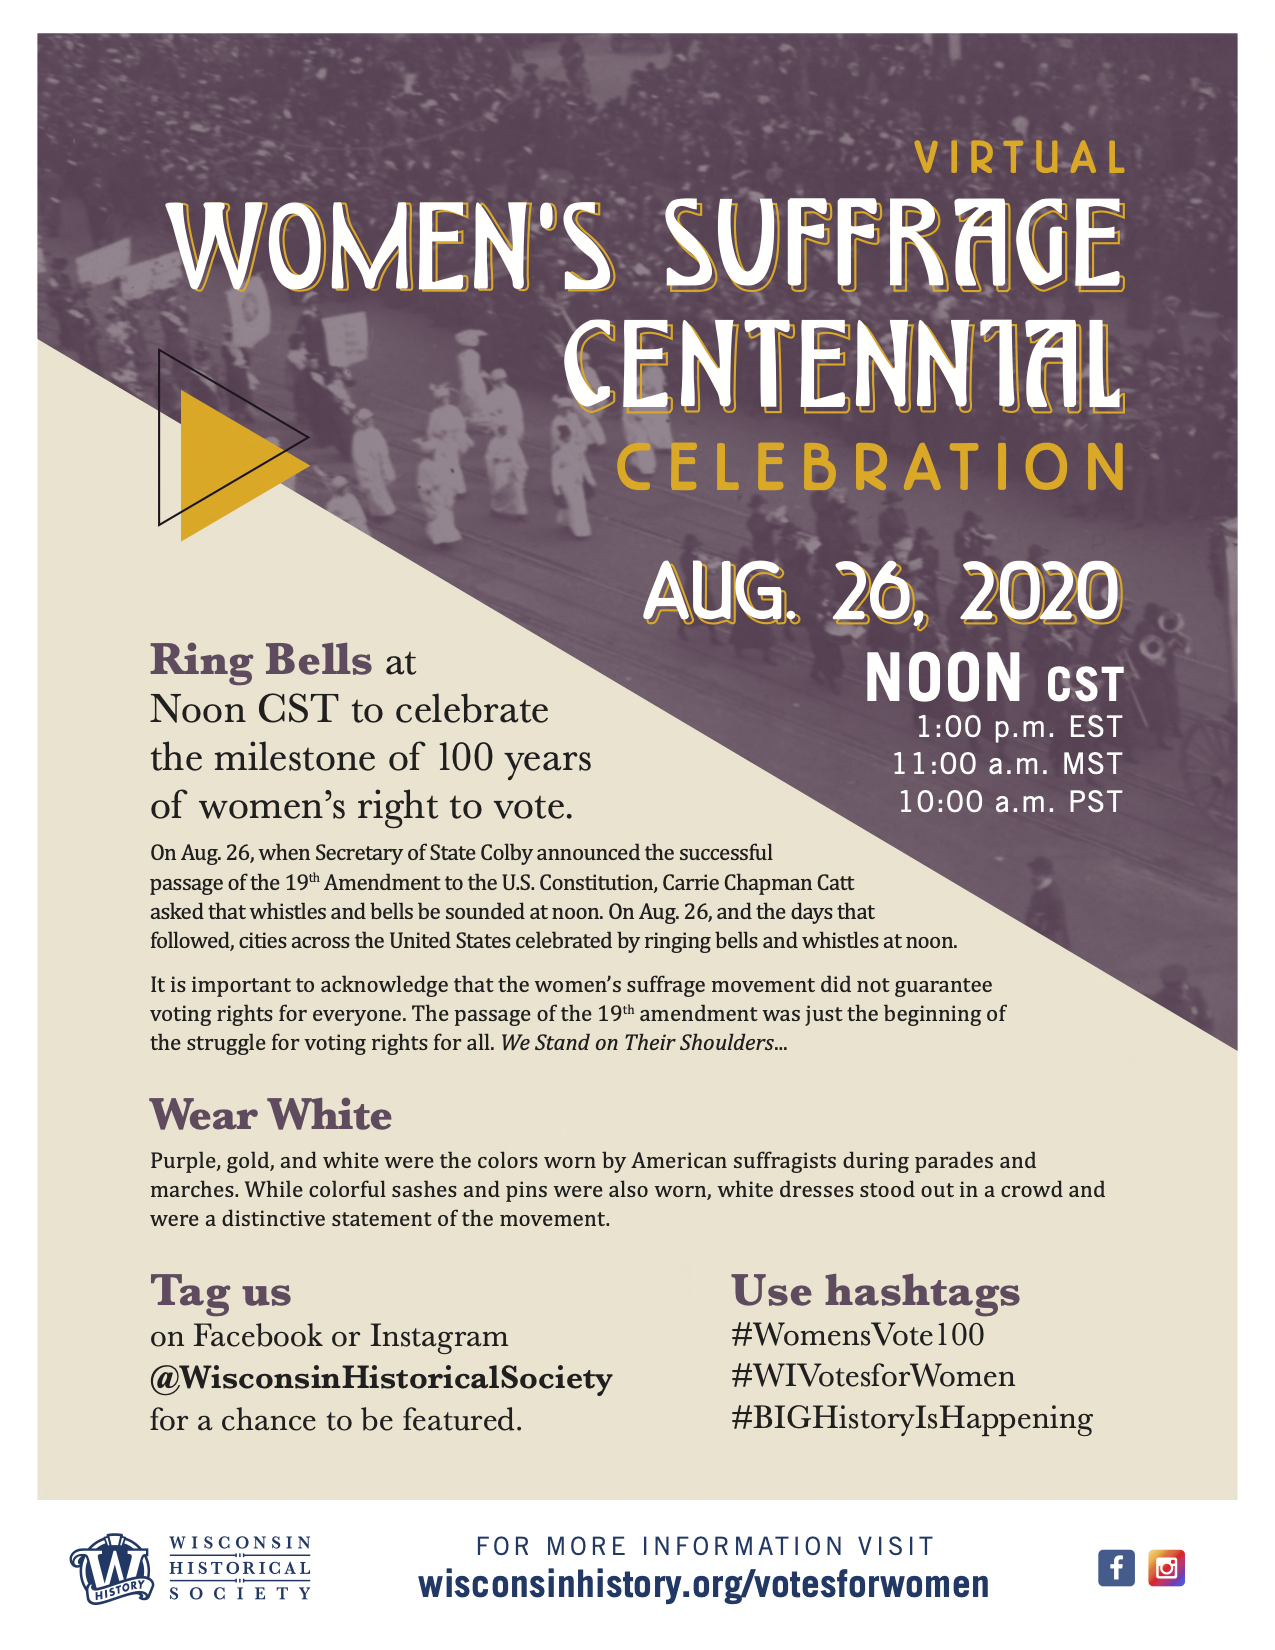 Event flyer for the Virtual Women's Suffrage Centennial Event